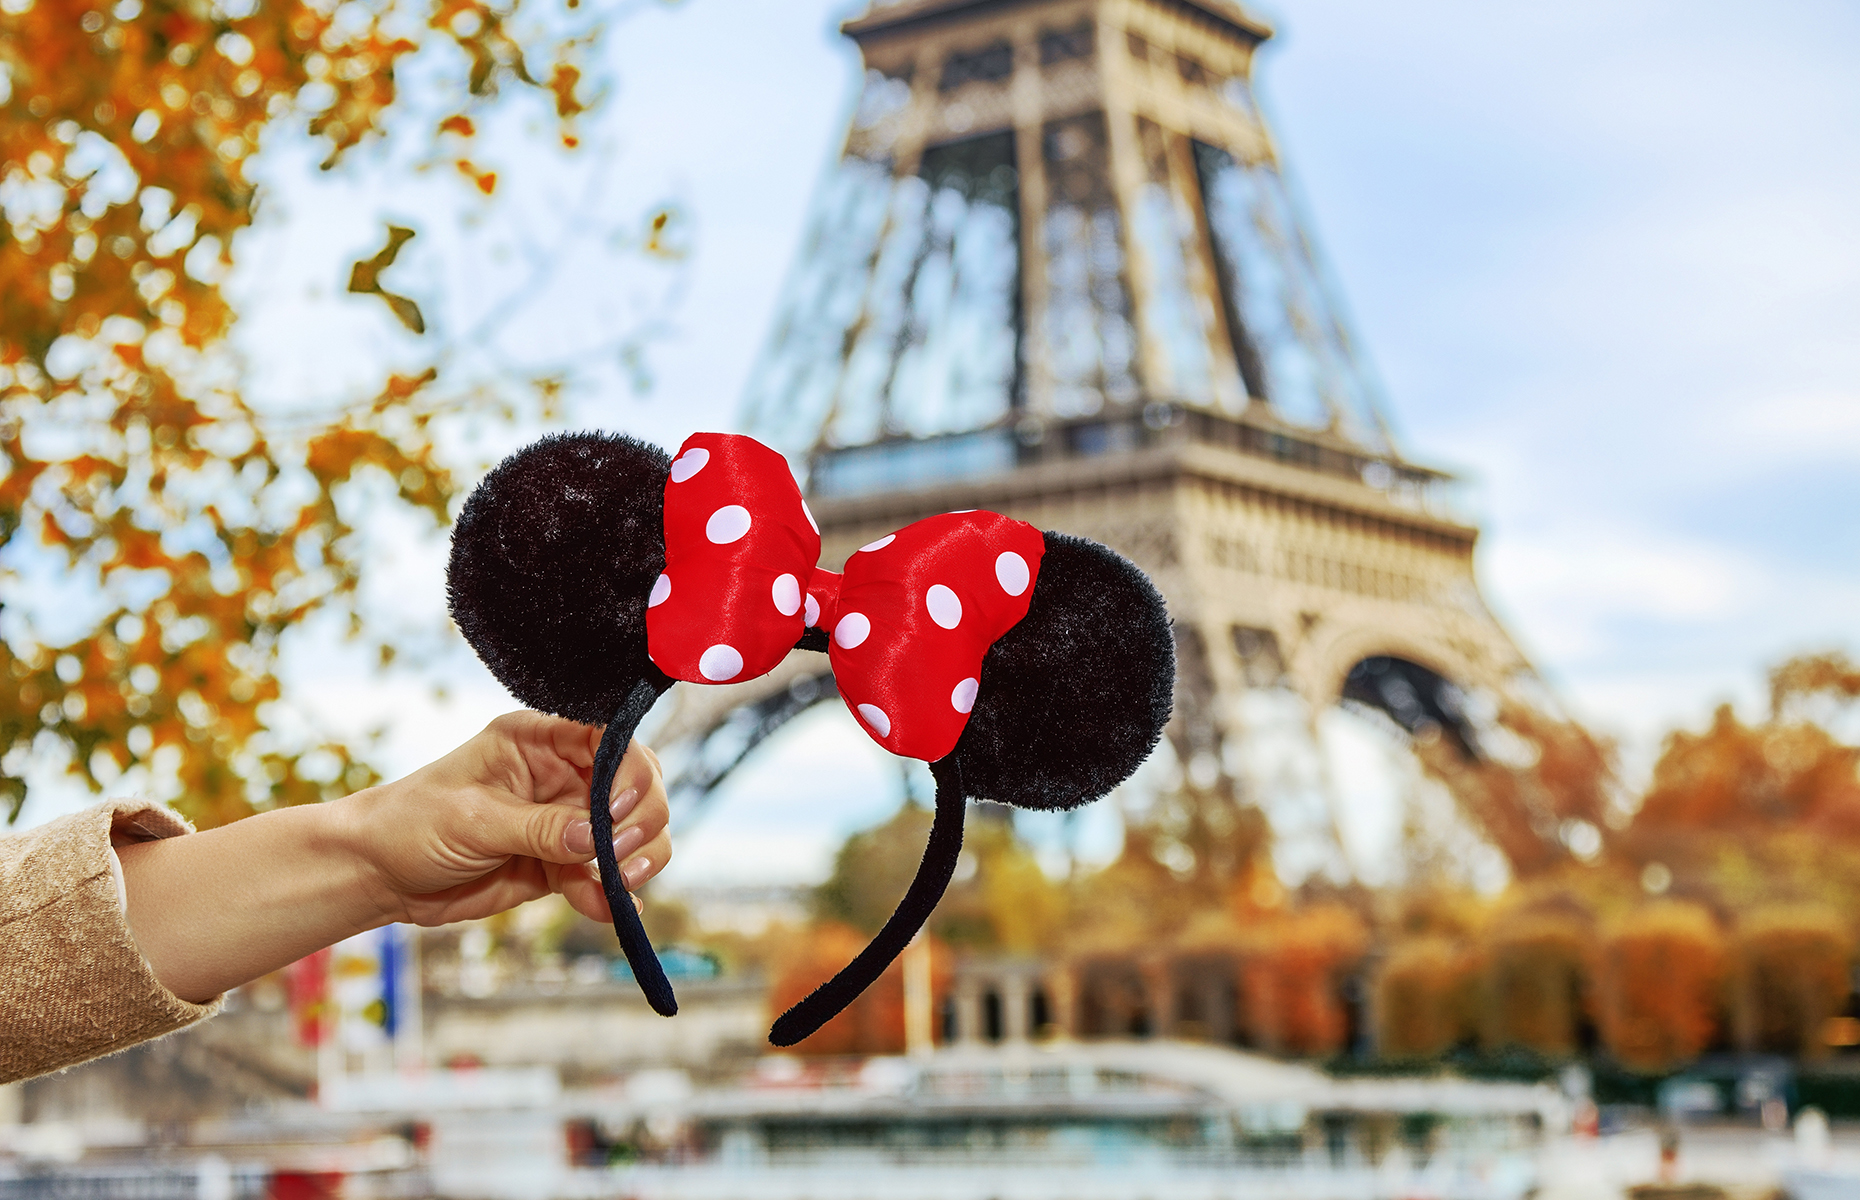 Minne Mouse ears and the Eiffel Tower, Paris. (Image: Alliance Images/Shutterstock)